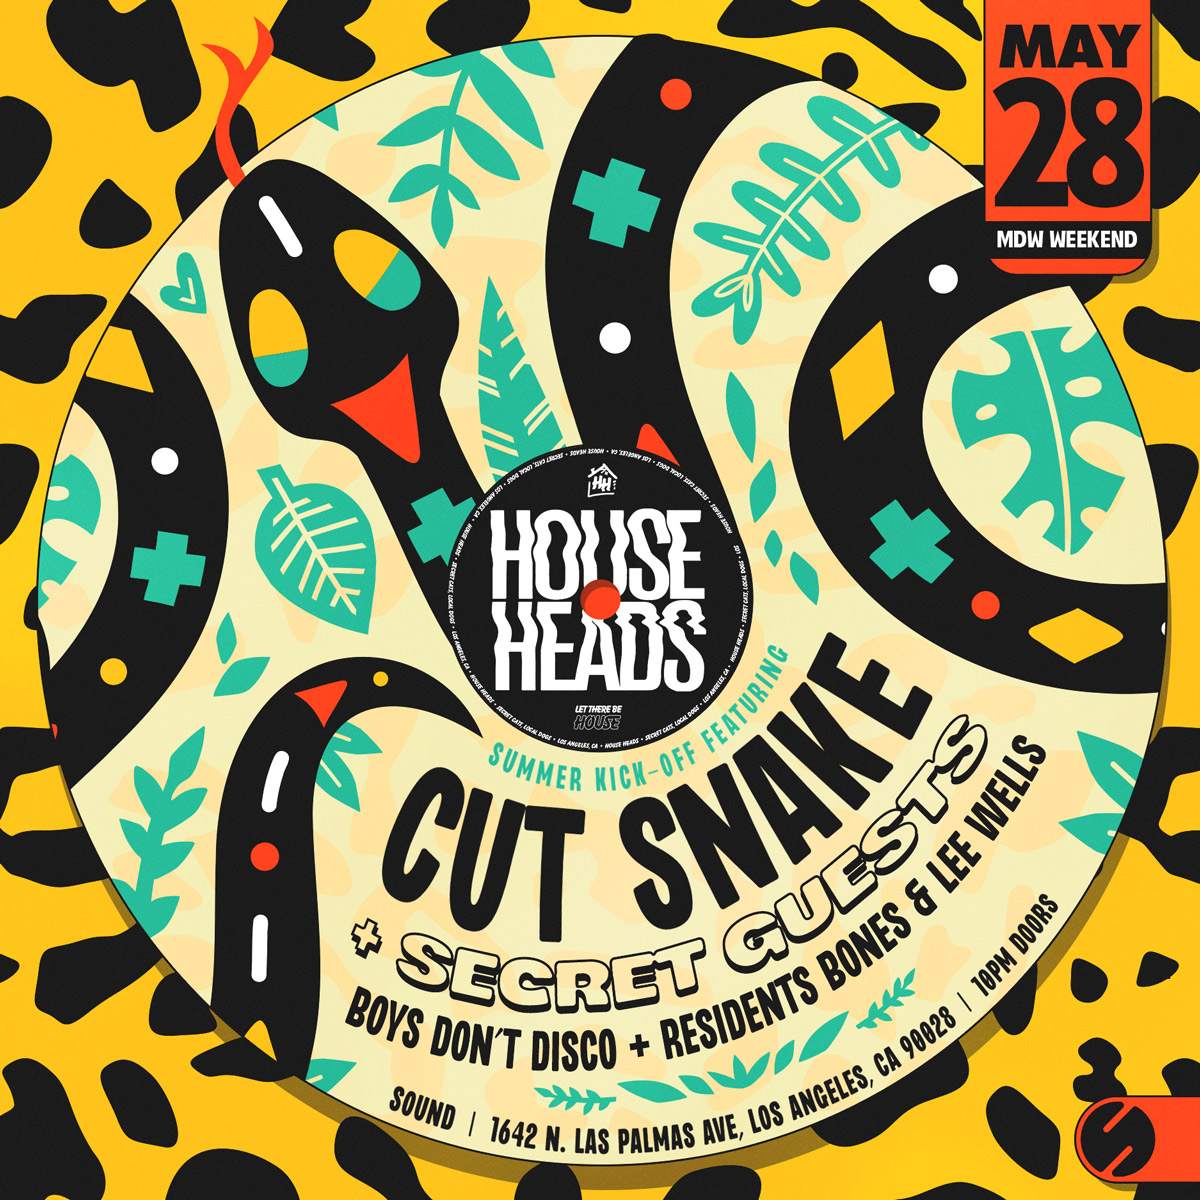 House Heads presents Cut Snake with support by Boys Don't Disco, Bones and Lee Wells - フライヤー表